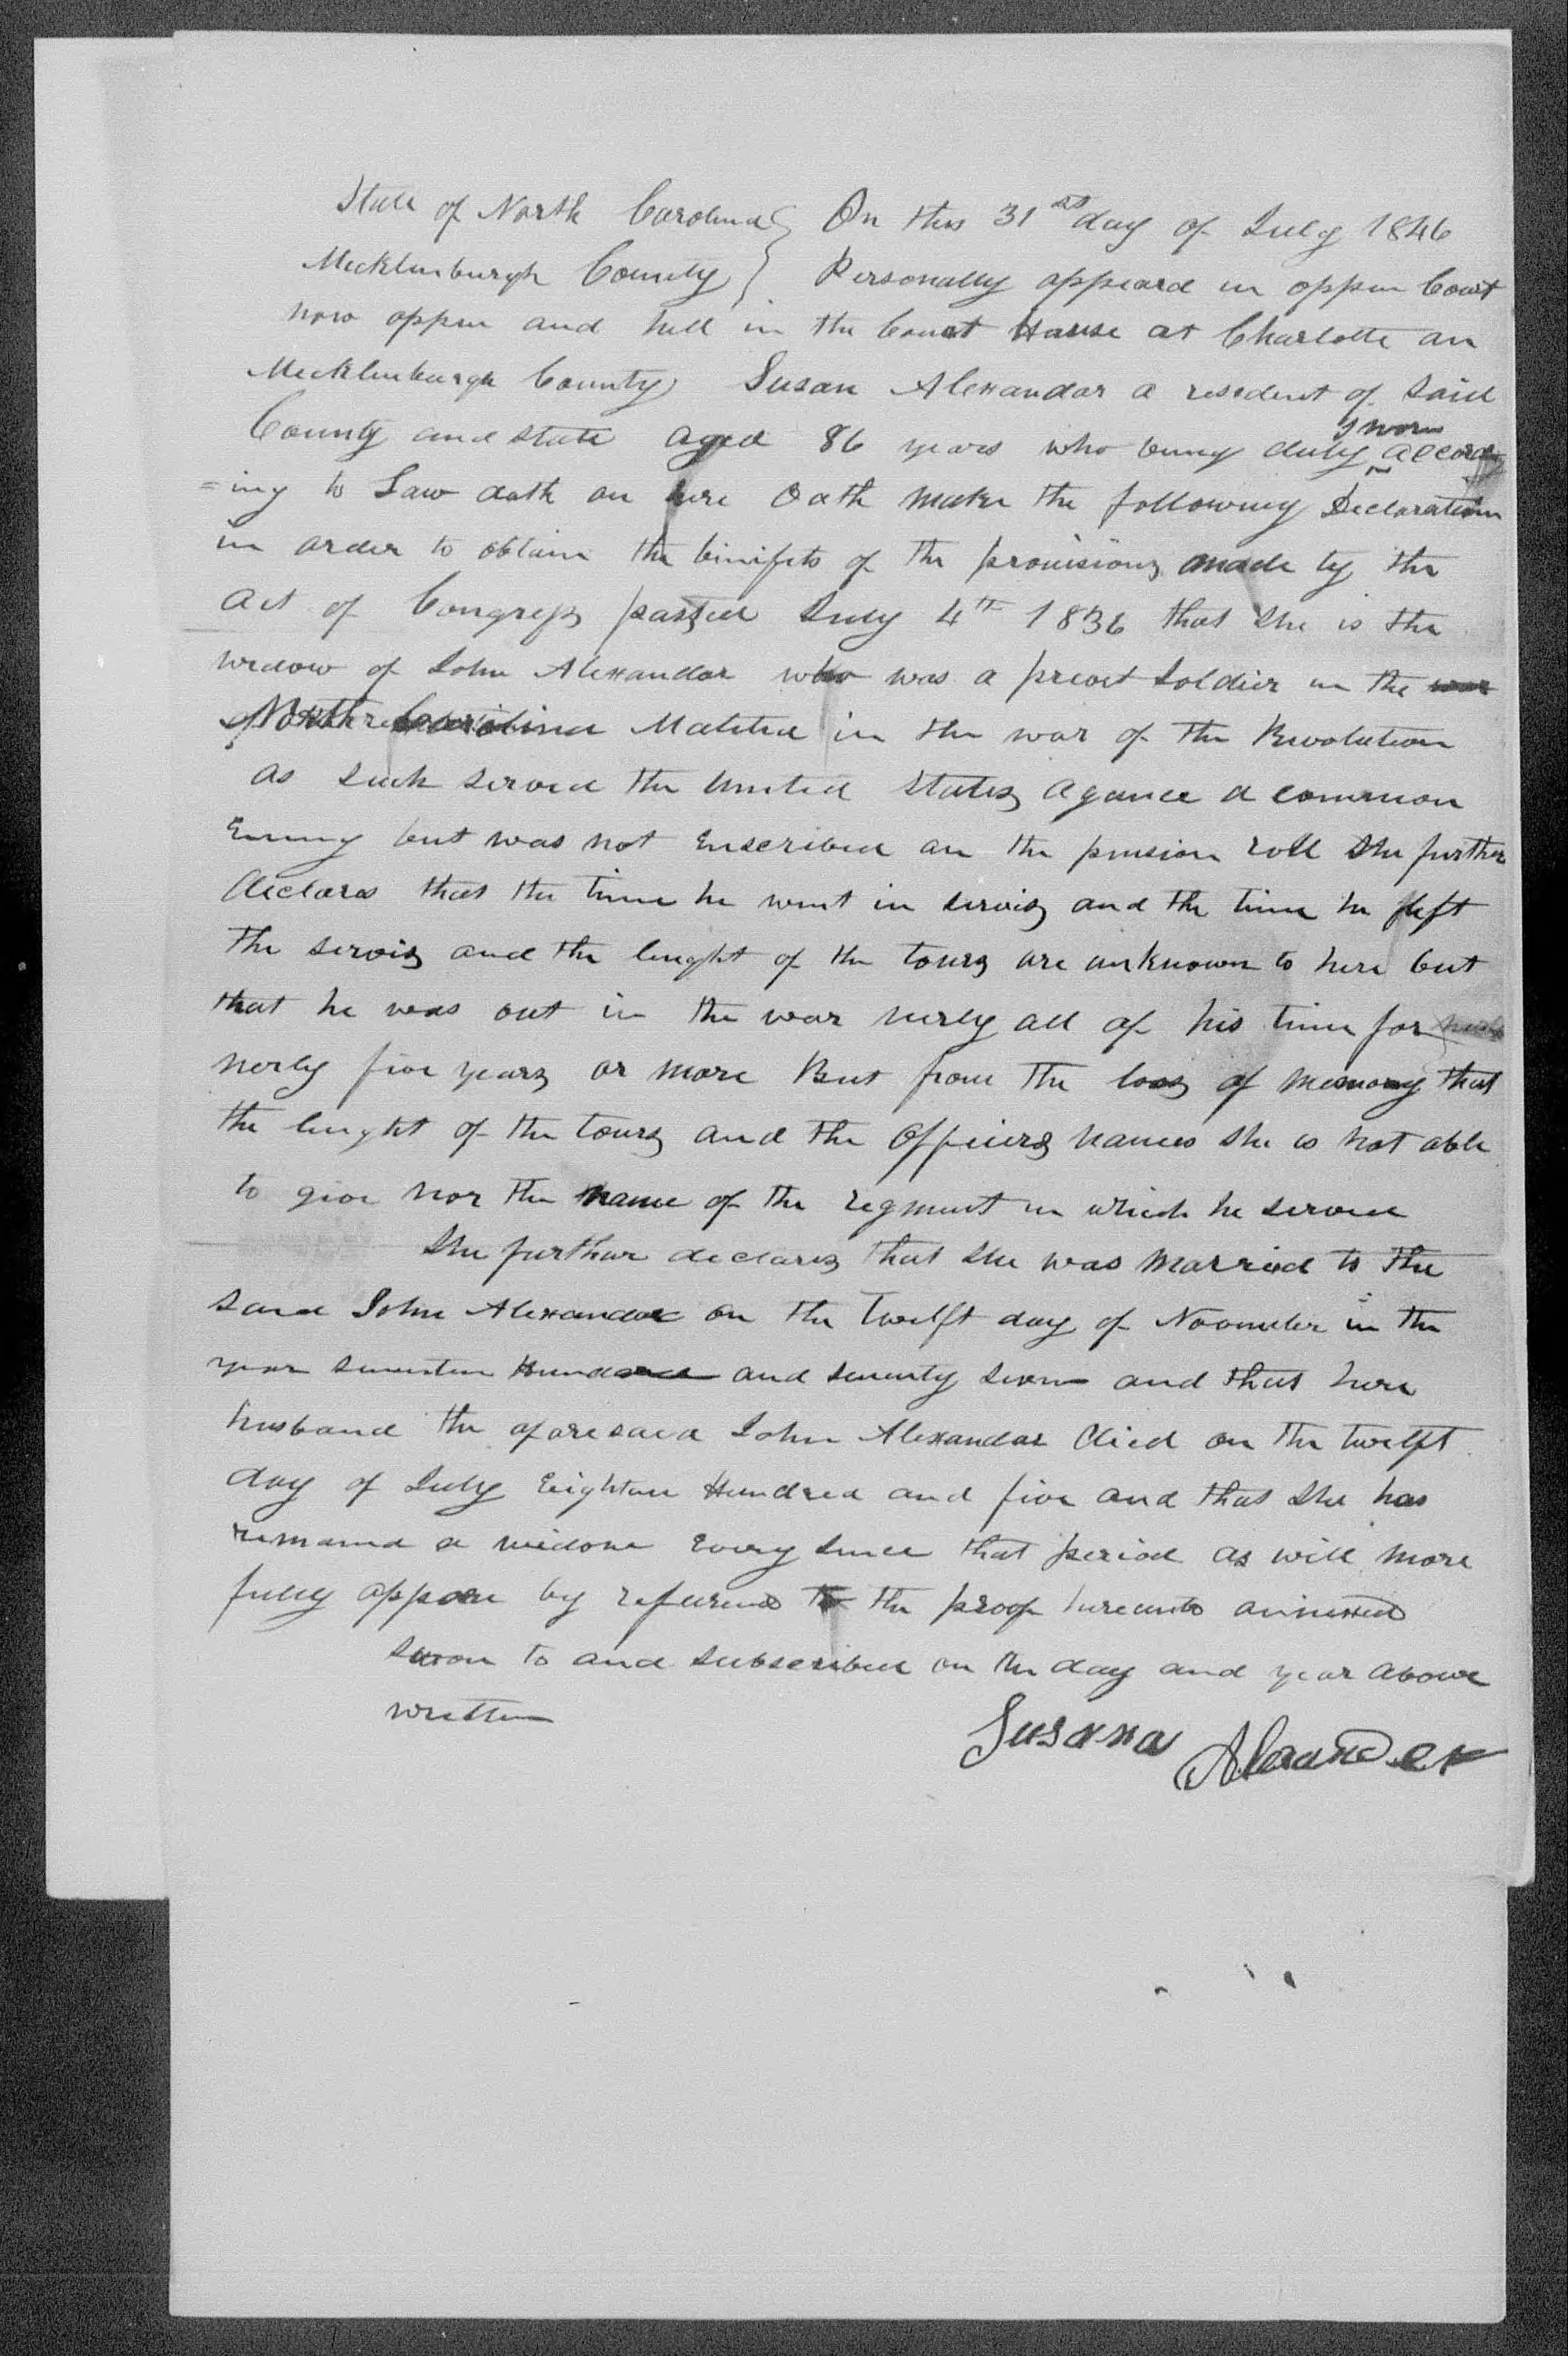 Application for a Widow's Pension from Susana Alexander, 31 July 1846, page 2